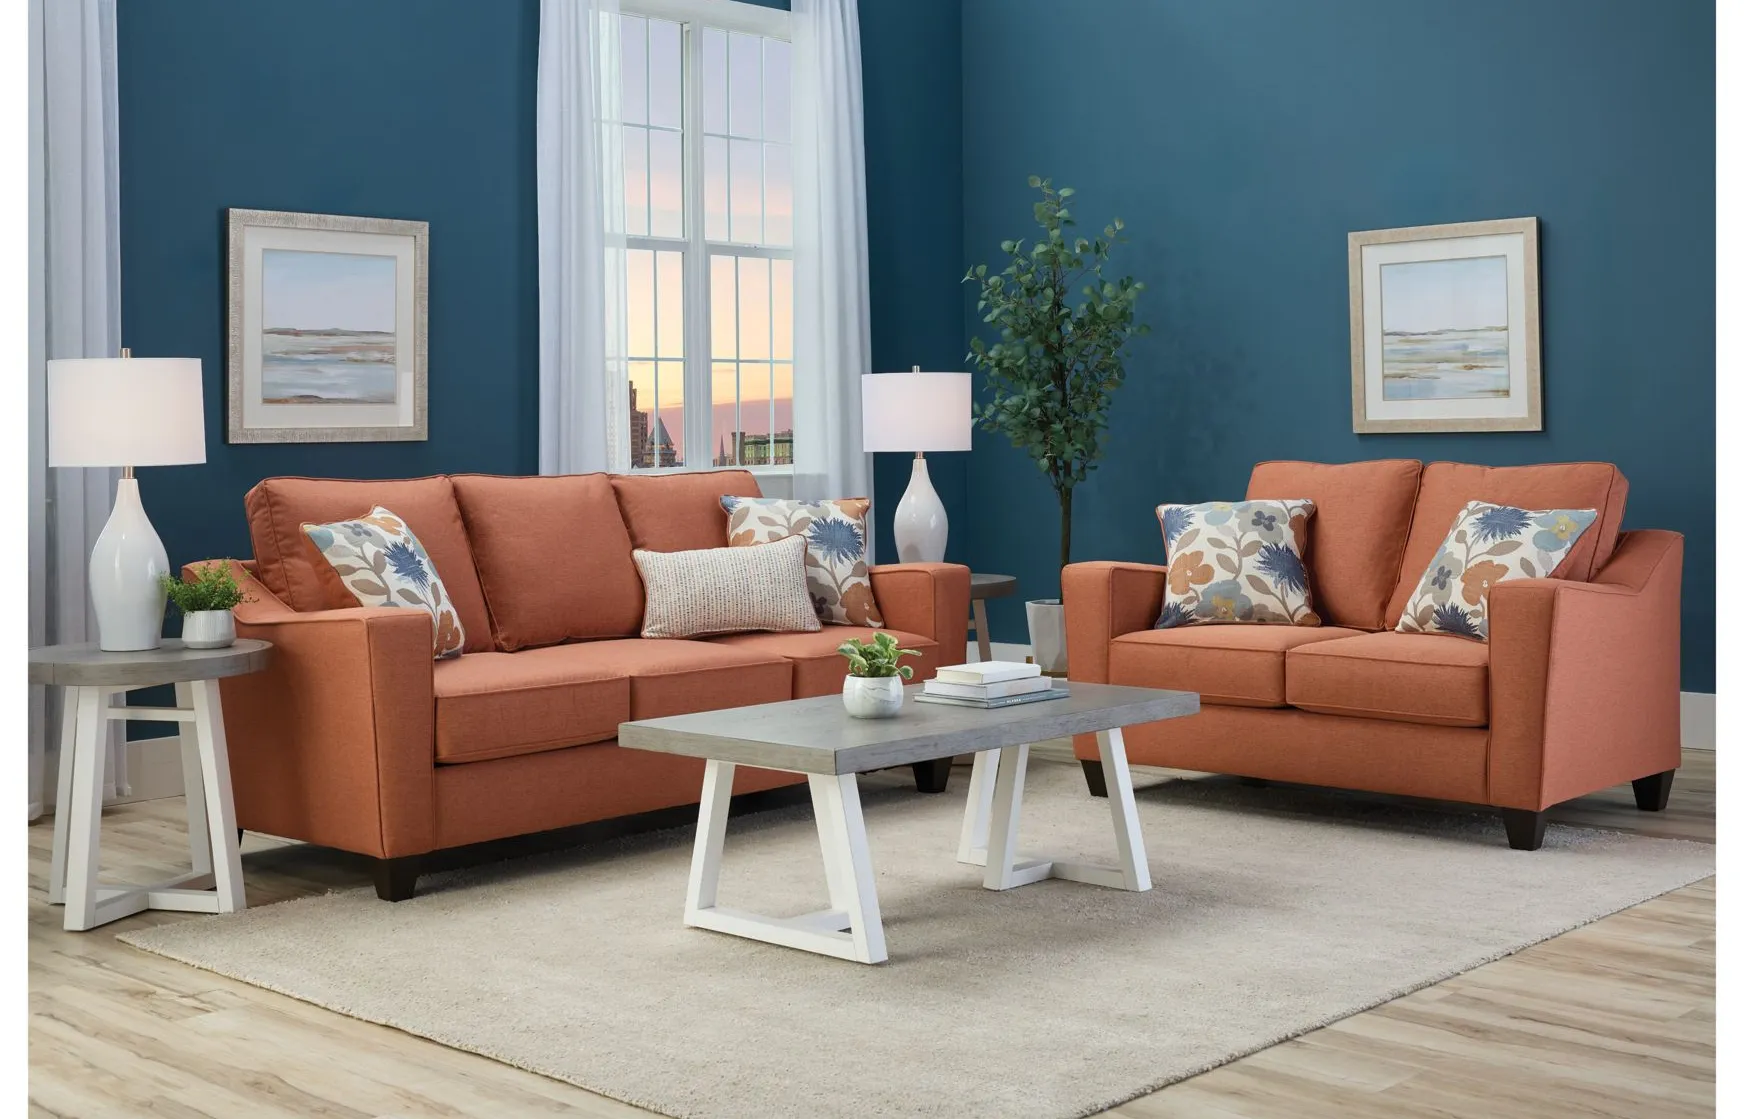 Flora Living Room Set in Laurent Coral by Fusion Furniture